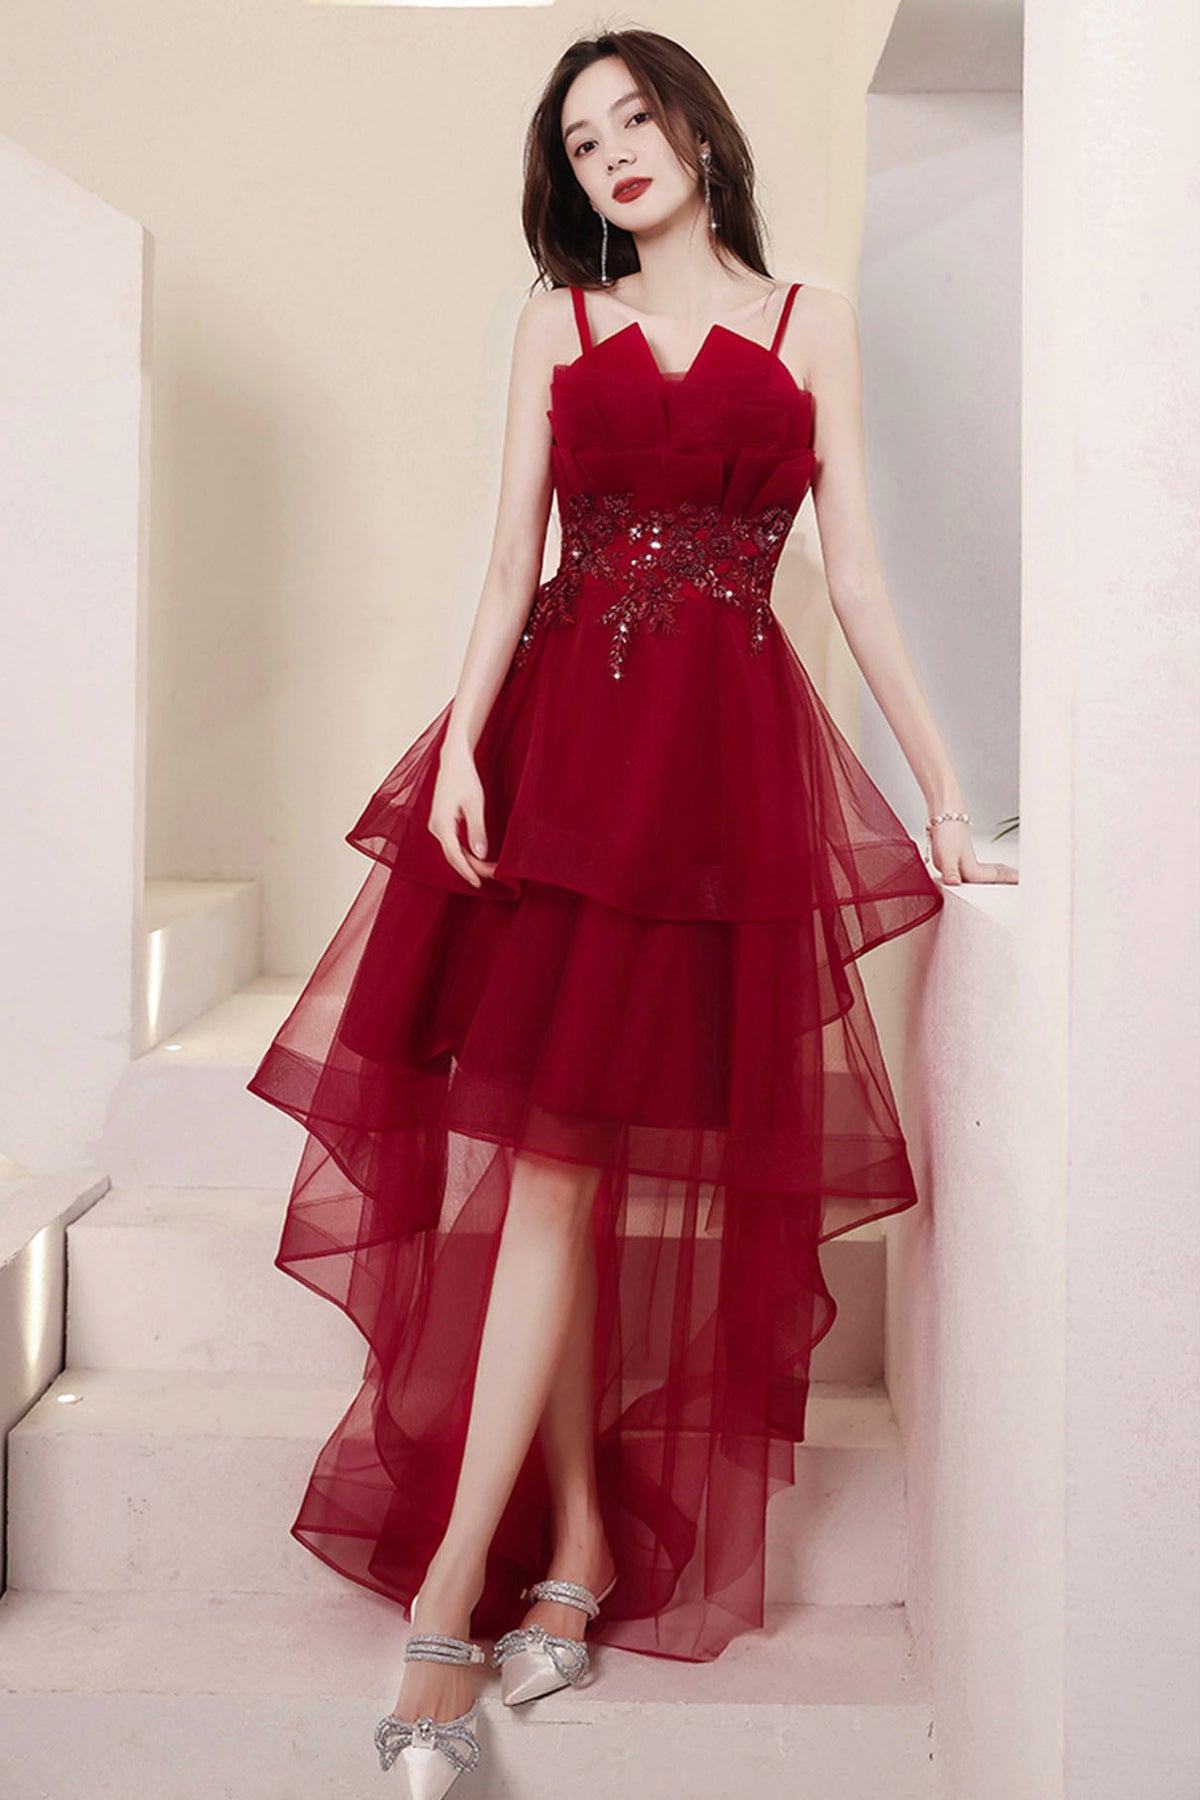 Burgundy Lace High-Low Prom Dress, Lovely Homecoming Party Dress